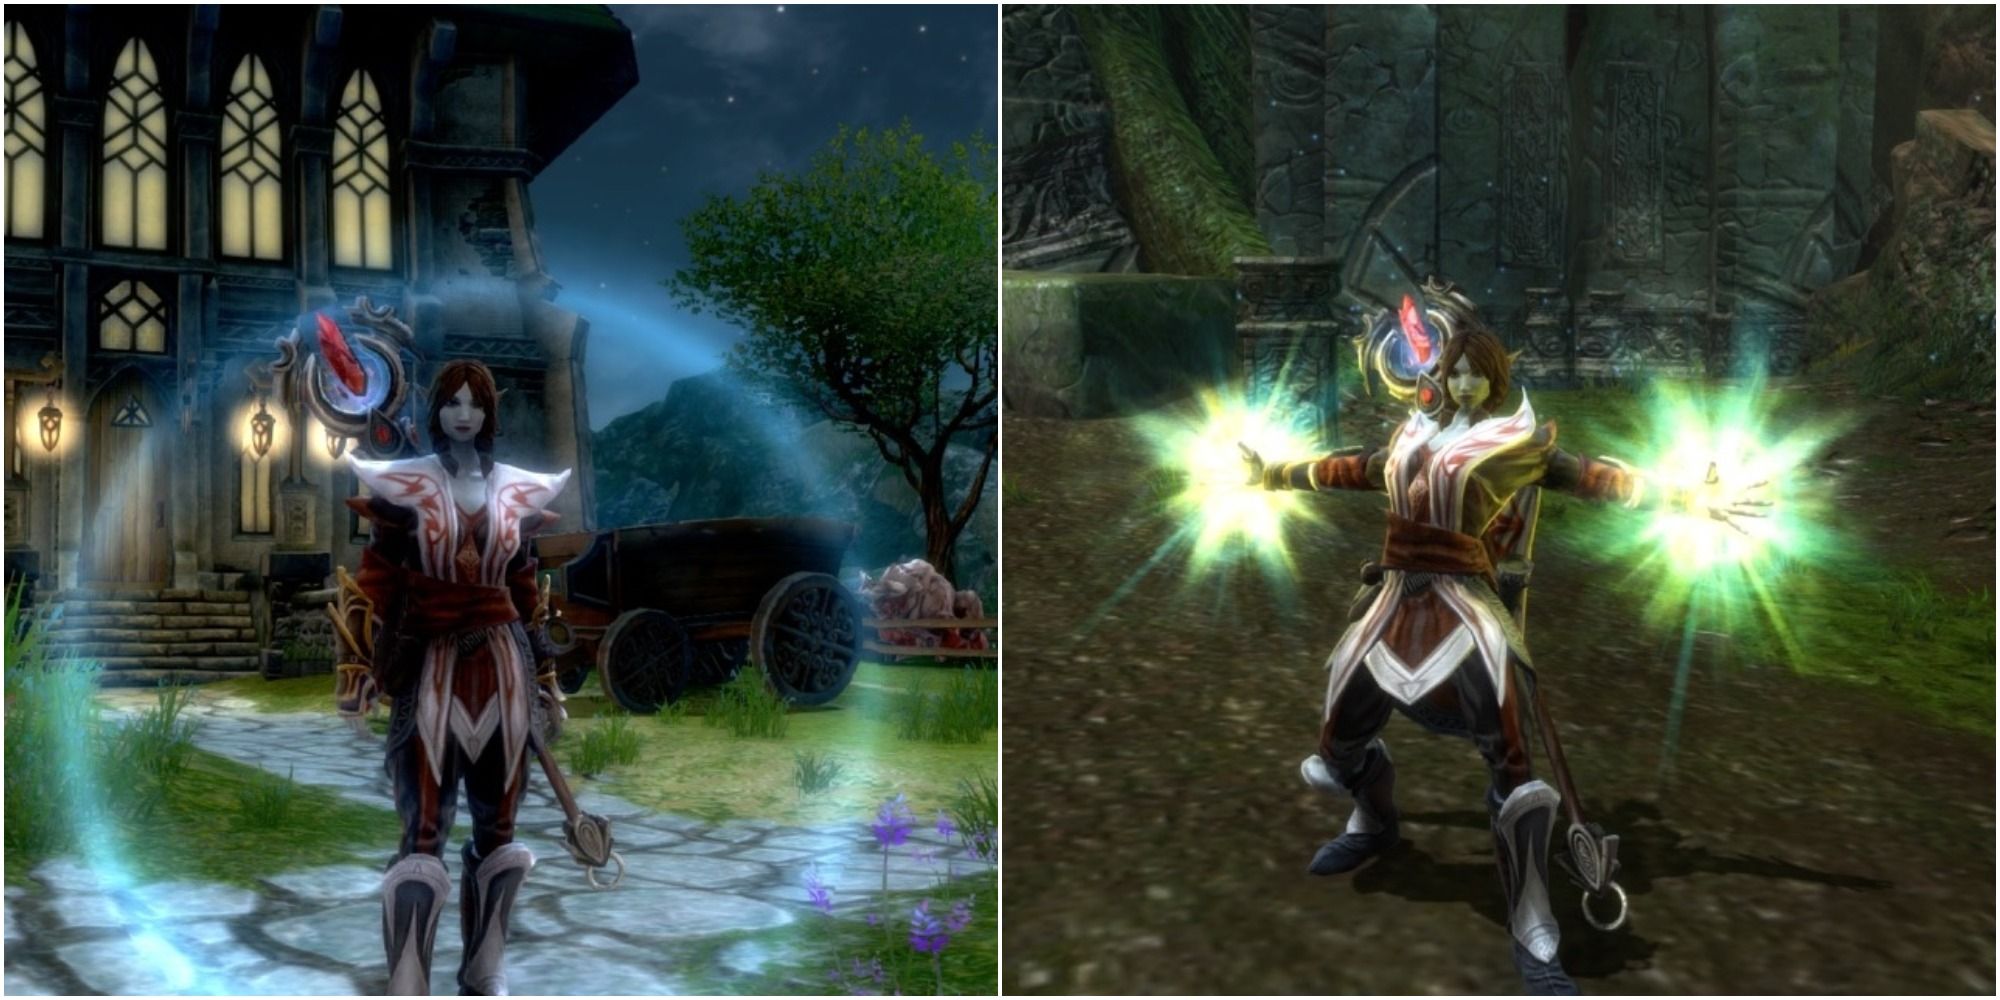 Kingdoms of Amalur Different spells being cast